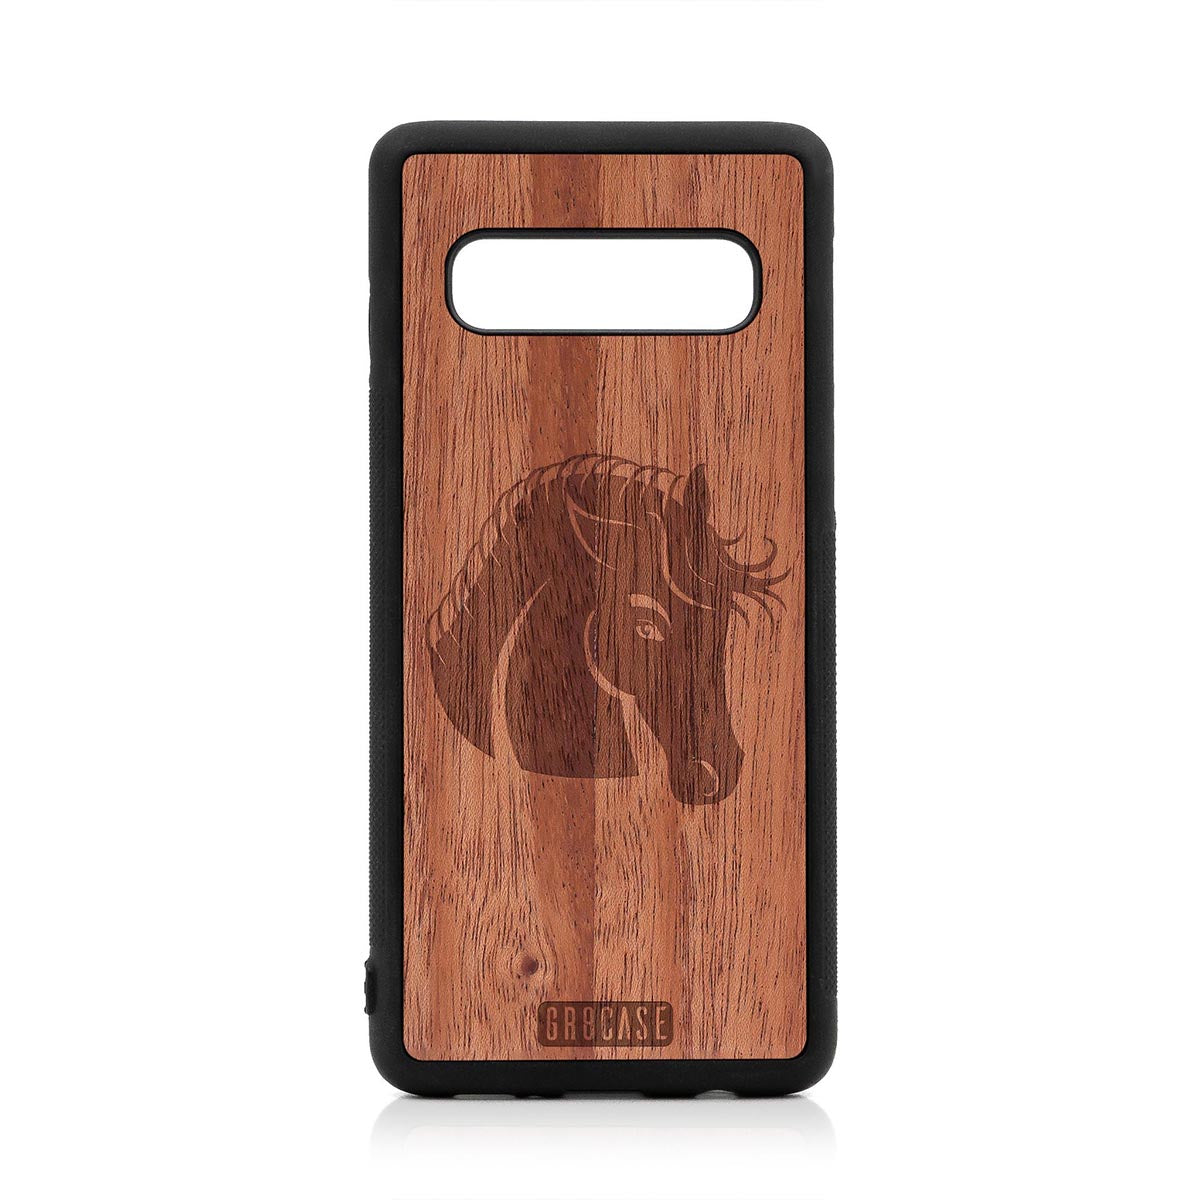 Horse Design Wood Case For Samsung Galaxy S10 by GR8CASE